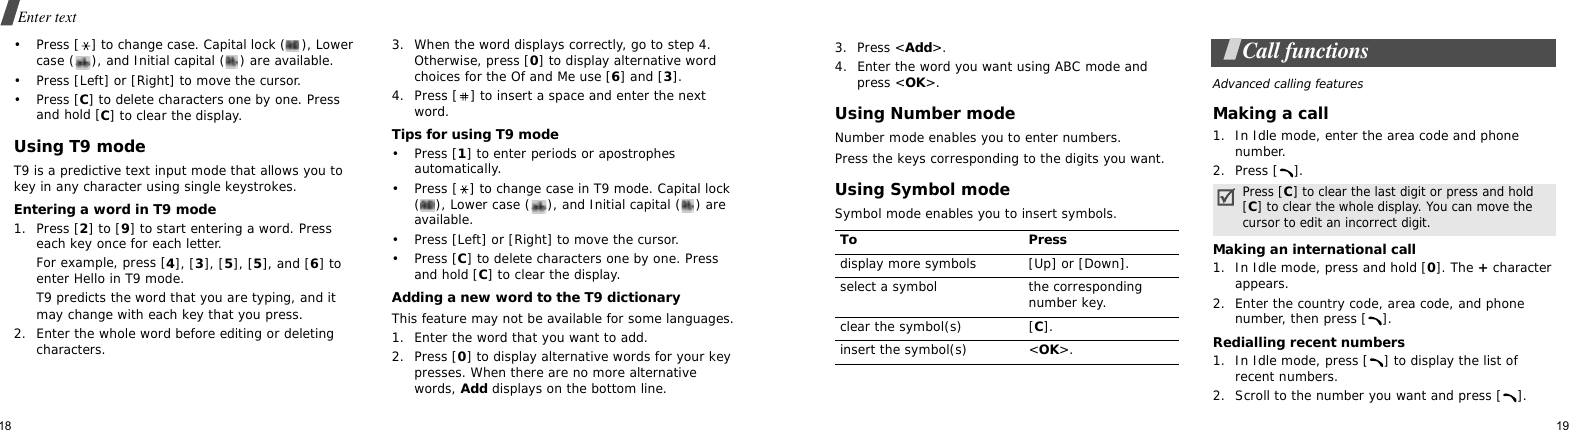 18Enter text• Press [ ] to change case. Capital lock ( ), Lower case ( ), and Initial capital ( ) are available.• Press [Left] or [Right] to move the cursor. • Press [C] to delete characters one by one. Press and hold [C] to clear the display.Using T9 modeT9 is a predictive text input mode that allows you to key in any character using single keystrokes.Entering a word in T9 mode1. Press [2] to [9] to start entering a word. Press each key once for each letter. For example, press [4], [3], [5], [5], and [6] to enter Hello in T9 mode. T9 predicts the word that you are typing, and it may change with each key that you press.2. Enter the whole word before editing or deleting characters.3. When the word displays correctly, go to step 4. Otherwise, press [0] to display alternative word choices for the Of and Me use [6] and [3].4. Press [ ] to insert a space and enter the next word.Tips for using T9 mode• Press [1] to enter periods or apostrophes automatically.• Press [ ] to change case in T9 mode. Capital lock ( ), Lower case ( ), and Initial capital ( ) are available.• Press [Left] or [Right] to move the cursor.• Press [C] to delete characters one by one. Press and hold [C] to clear the display.Adding a new word to the T9 dictionaryThis feature may not be available for some languages.1. Enter the word that you want to add.2. Press [0] to display alternative words for your key presses. When there are no more alternative words, Add displays on the bottom line. 193. Press &lt;Add&gt;.4. Enter the word you want using ABC mode and press &lt;OK&gt;.Using Number modeNumber mode enables you to enter numbers. Press the keys corresponding to the digits you want.Using Symbol modeSymbol mode enables you to insert symbols.Call functionsAdvanced calling featuresMaking a call1. In Idle mode, enter the area code and phone number.2. Press [ ].Making an international call1. In Idle mode, press and hold [0]. The + character appears.2. Enter the country code, area code, and phone number, then press [ ].Redialling recent numbers1. In Idle mode, press [ ] to display the list of recent numbers.2. Scroll to the number you want and press [ ].To Pressdisplay more symbols [Up] or [Down]. select a symbol the corresponding number key.clear the symbol(s) [C]. insert the symbol(s) &lt;OK&gt;.Press [C] to clear the last digit or press and hold [C] to clear the whole display. You can move the cursor to edit an incorrect digit.